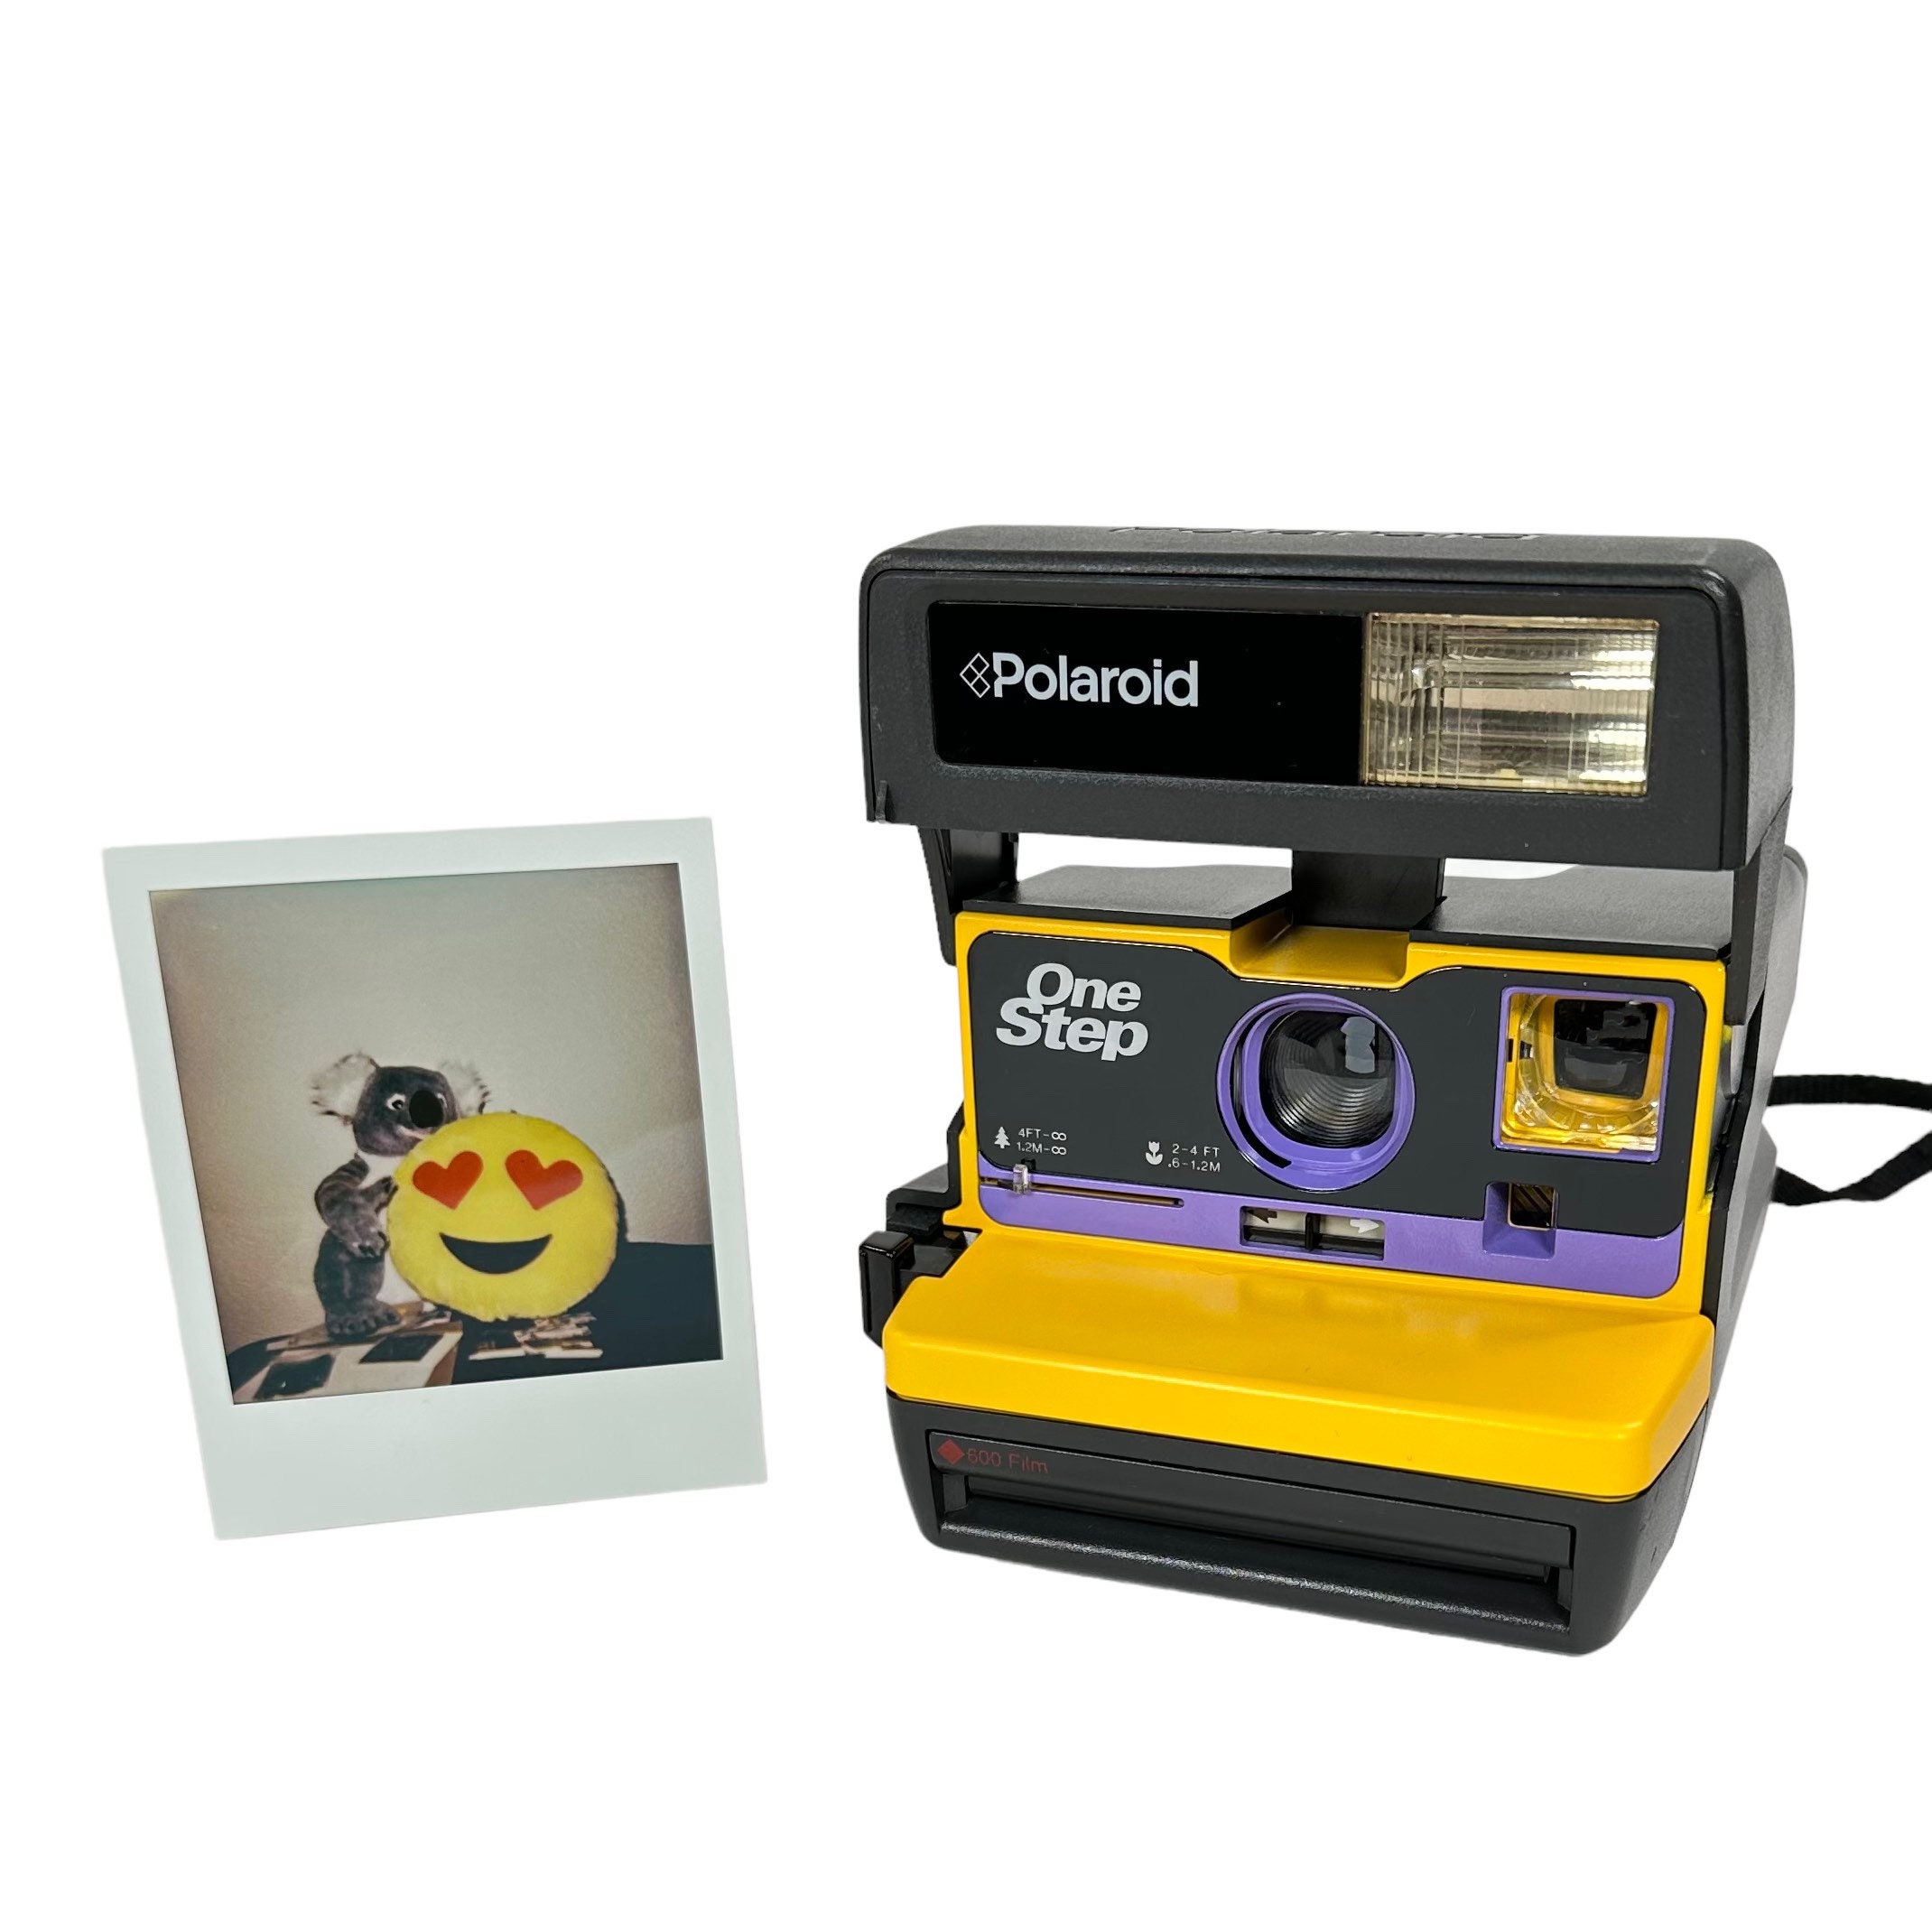 Overleving Mangel geld Upcycled Yellow and Purple Polaroid 600 OneStep - Refreshed, Tested, and  Ready For Fun